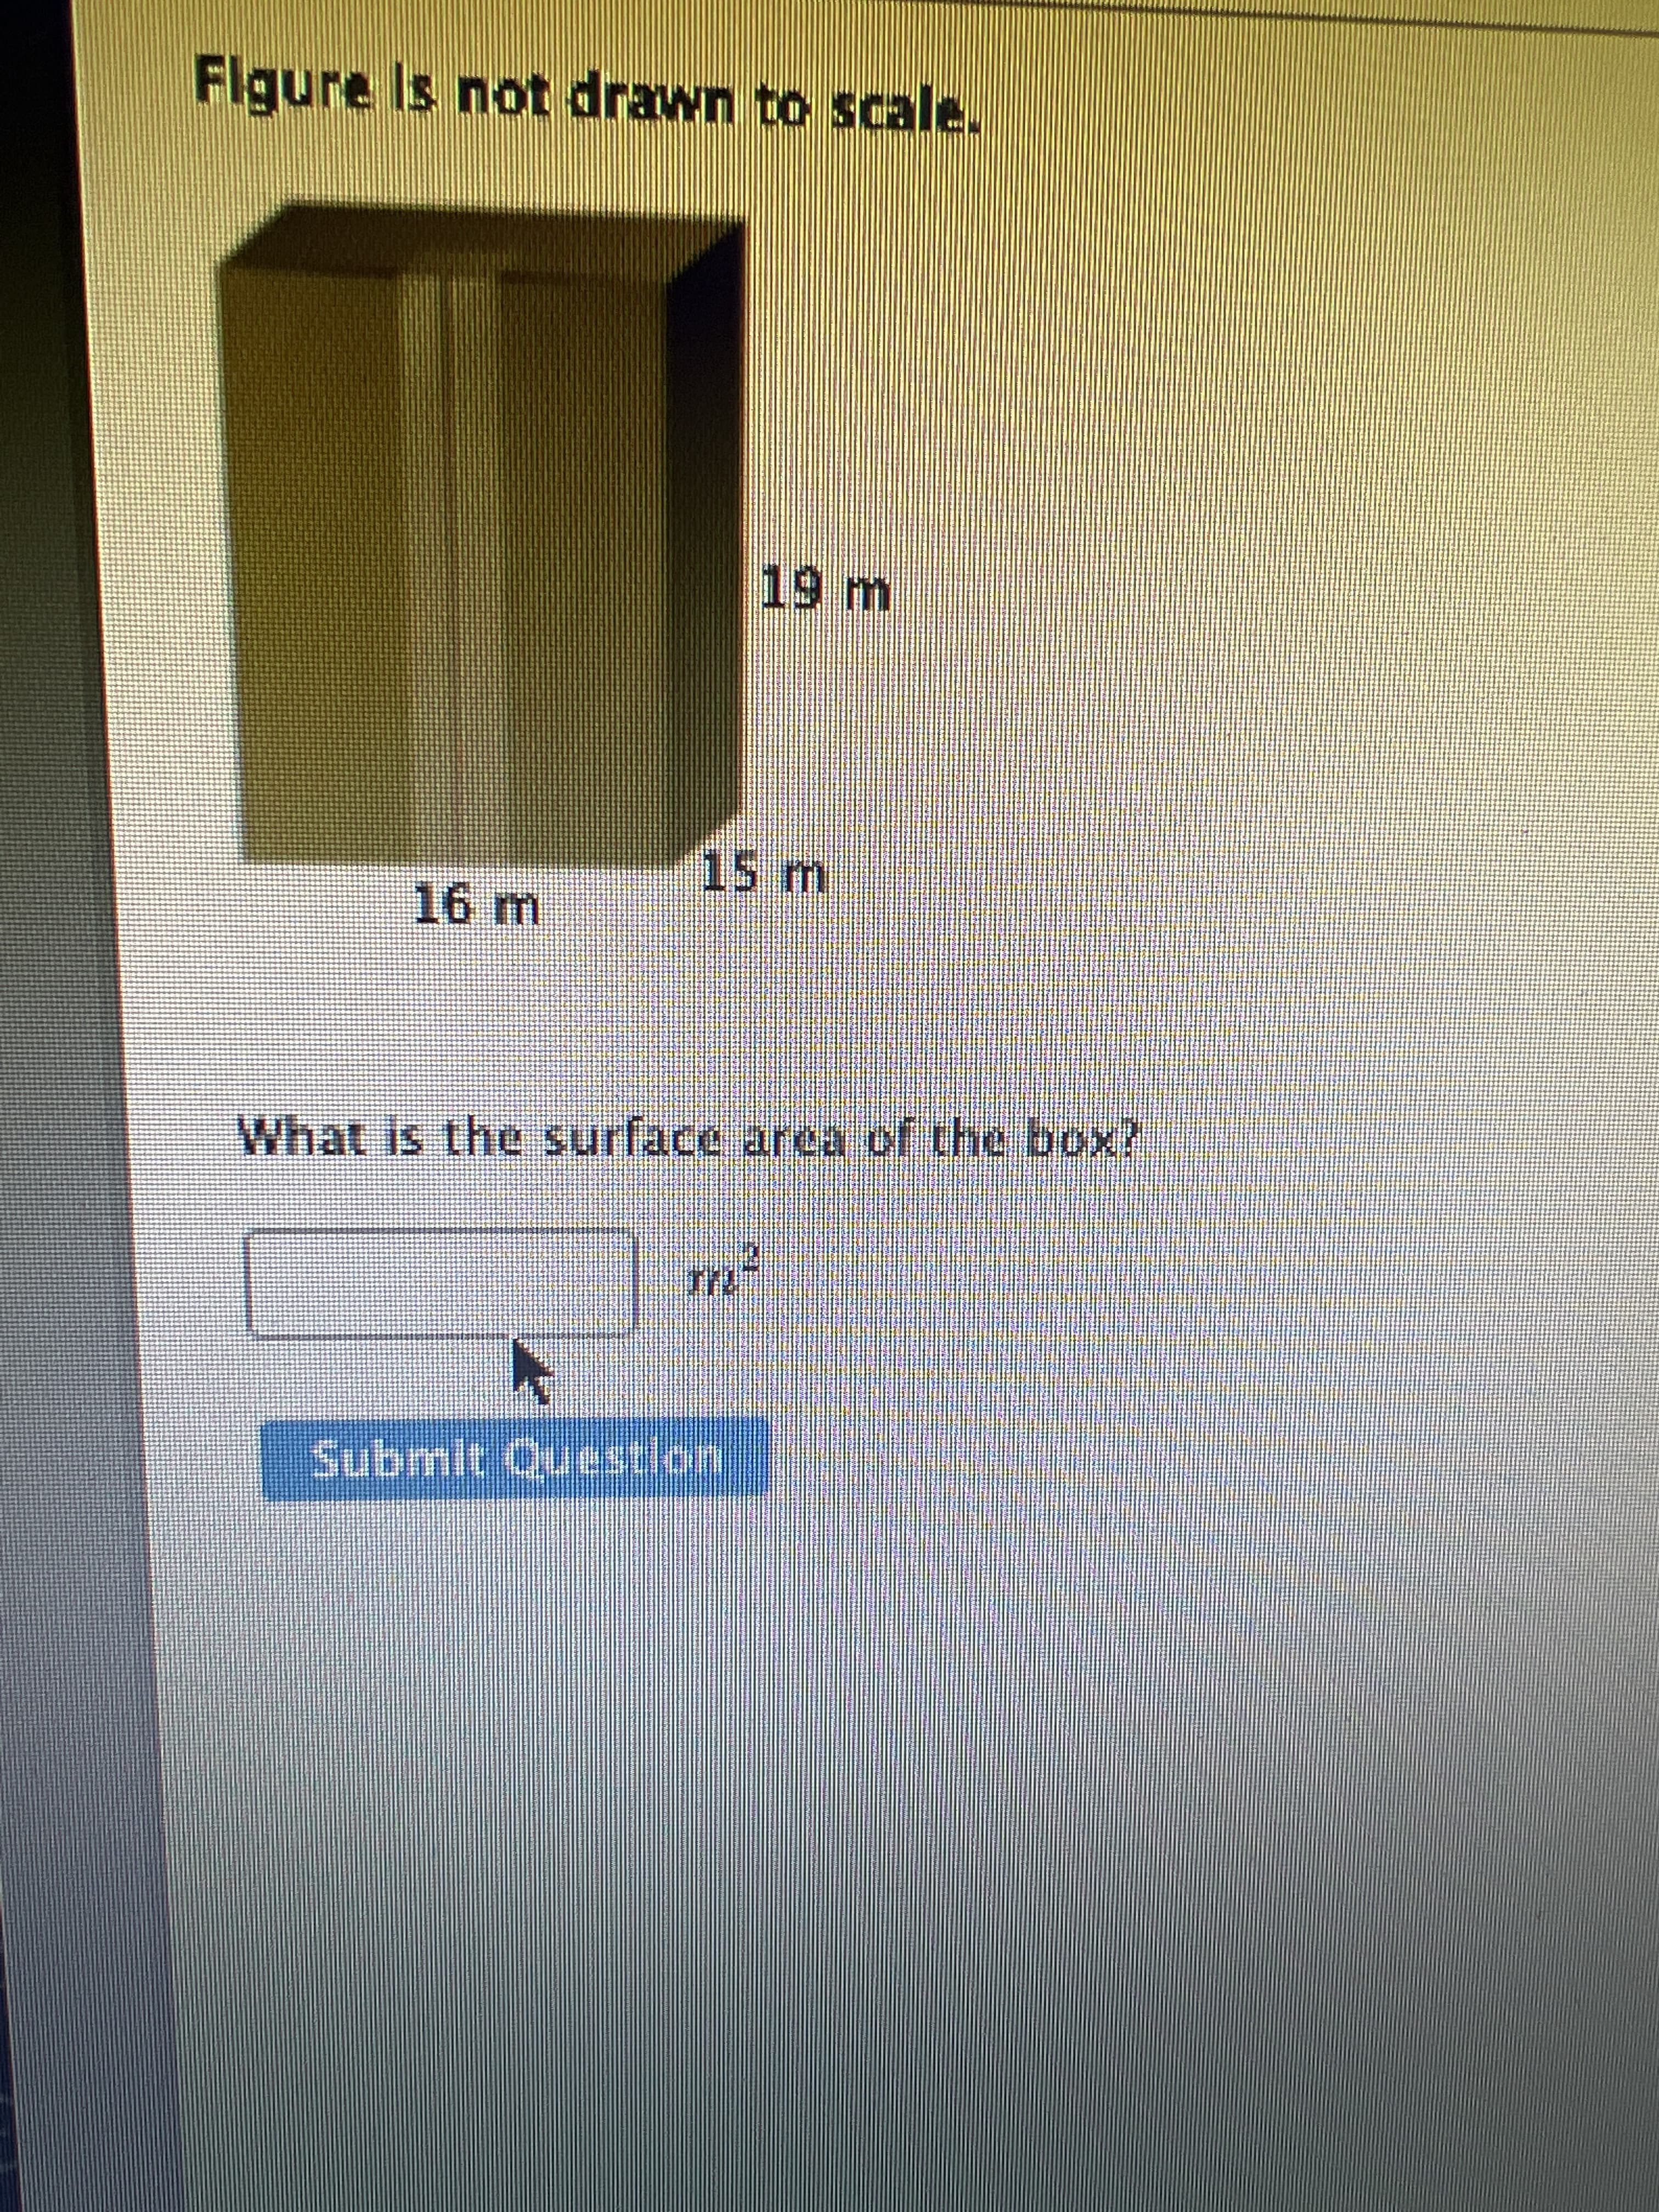 Flgure Is not drawn to scale.
19m
15m
16 m
What is the surface area of the box?
Submit Questlon
